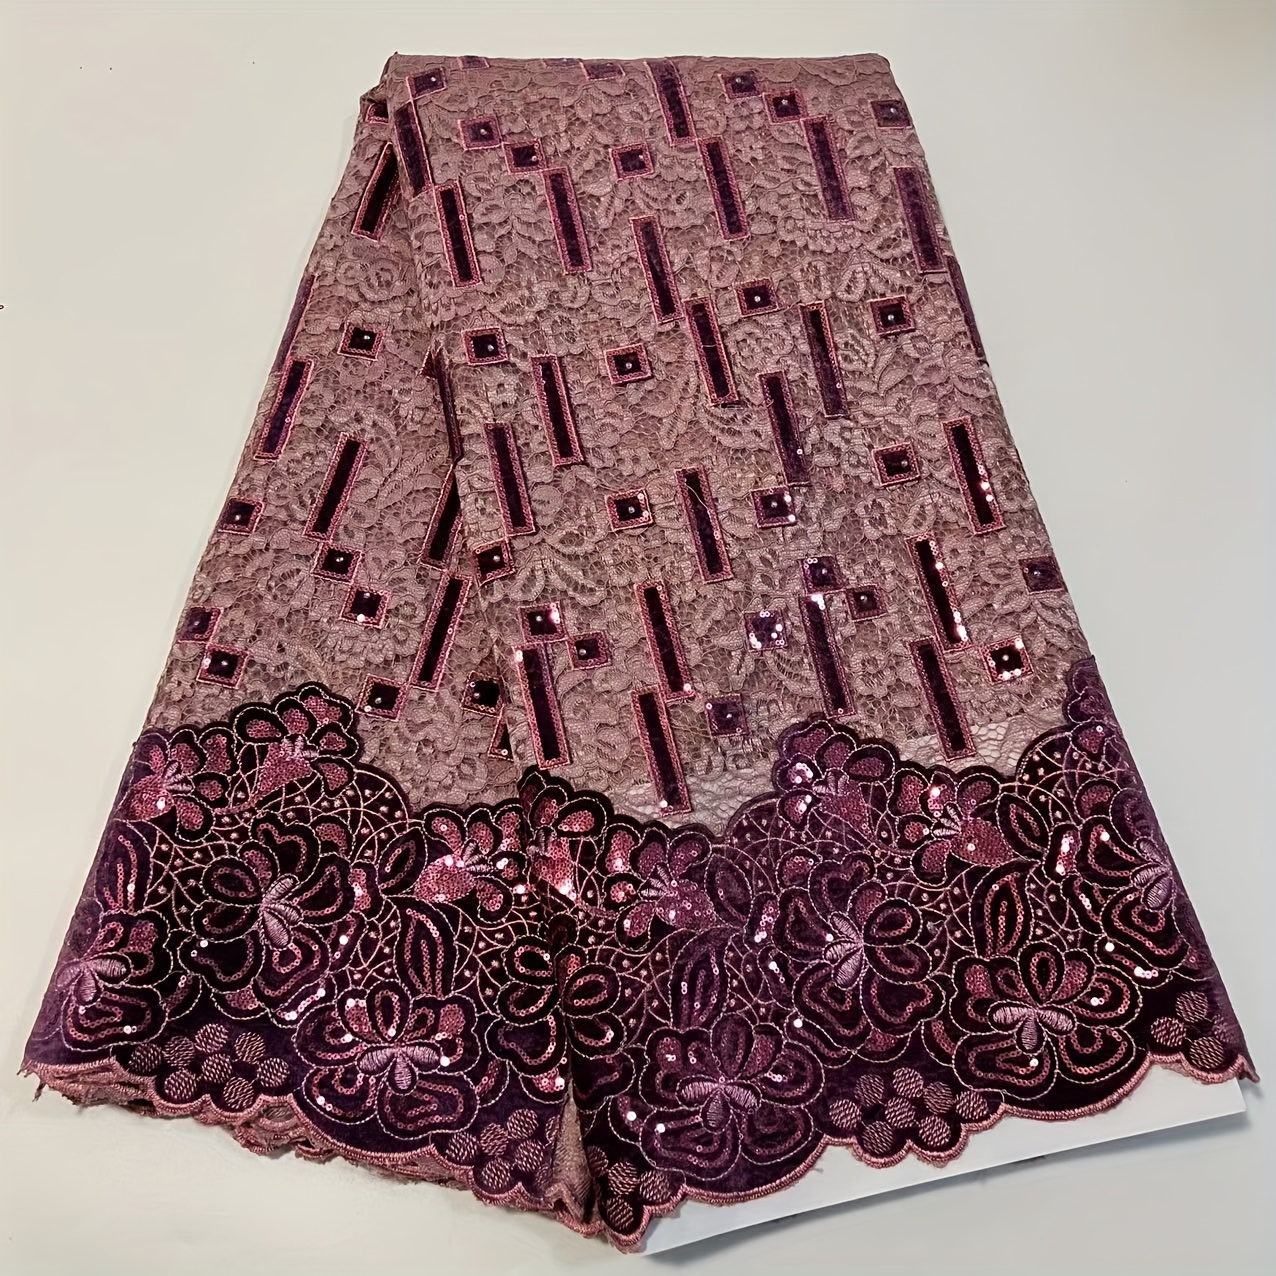 High Quality Nigerian Velvet Mesh Lace With Sequins African Lace